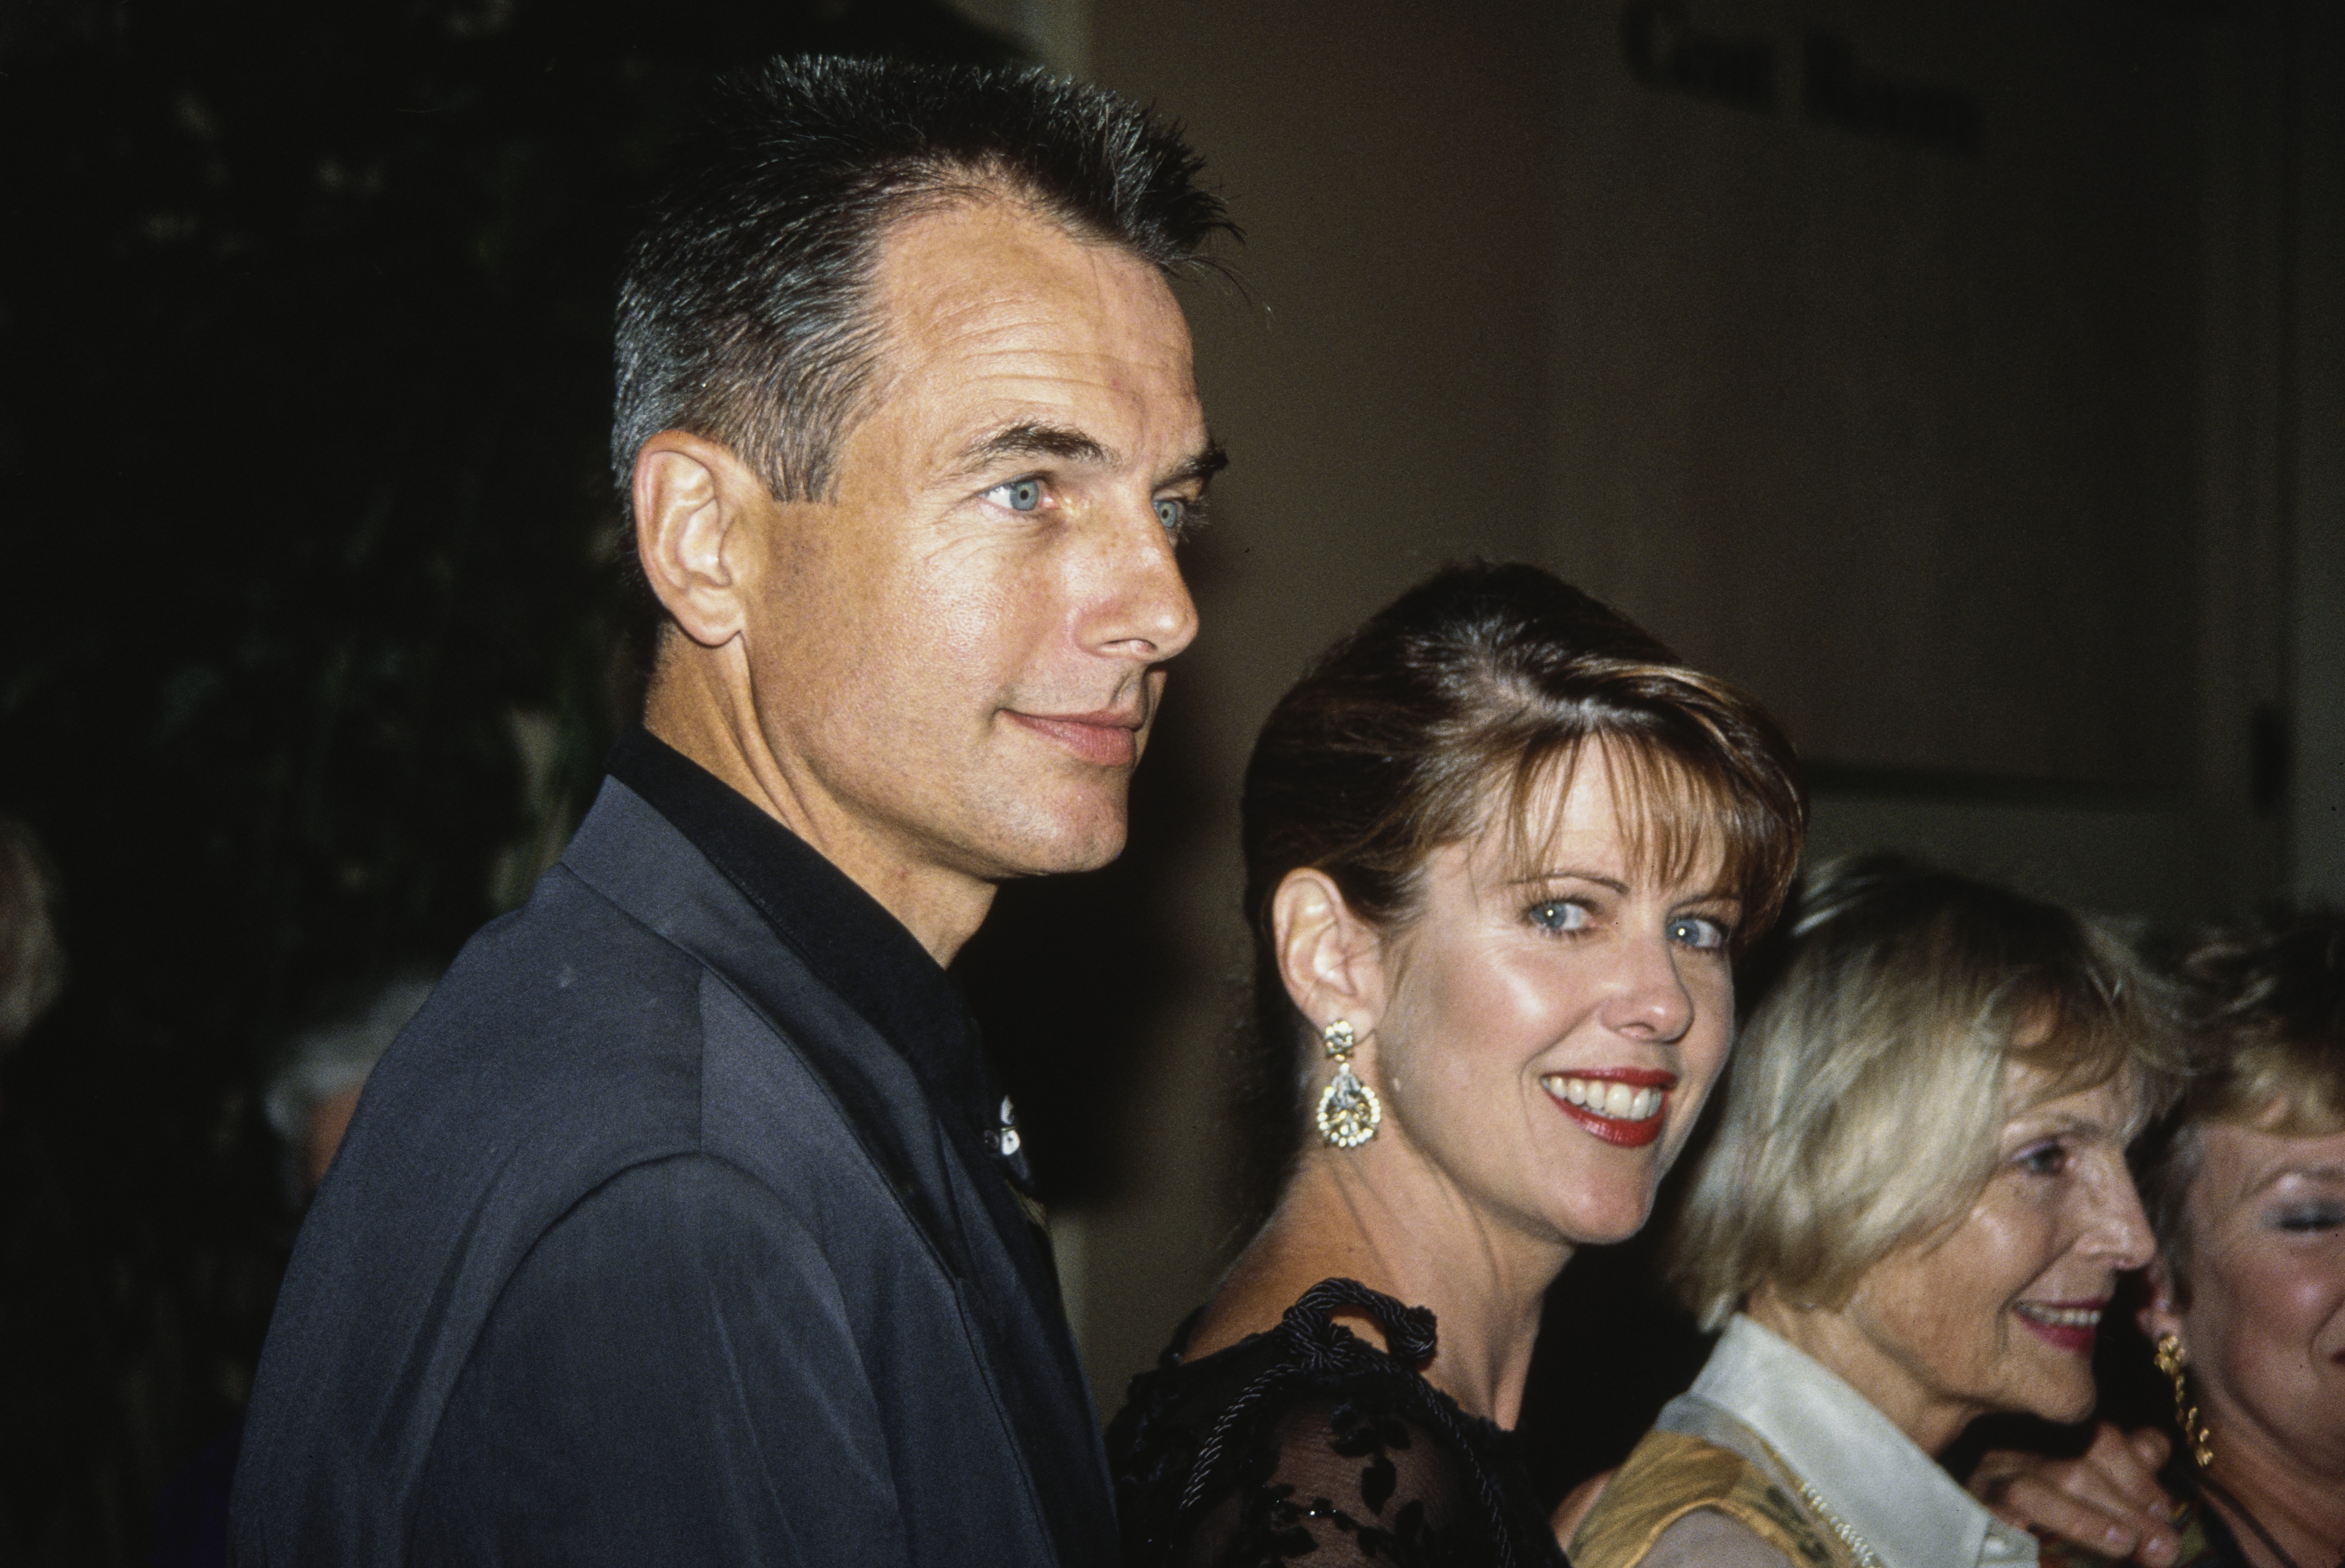 Mark Harmon and his wife, Pam Dawber, at Chesebrough-Ponds' 5th Annual National Hero Awards in Midtown Manhattan, New York City, on October 25, 1993 | Source: Getty Images